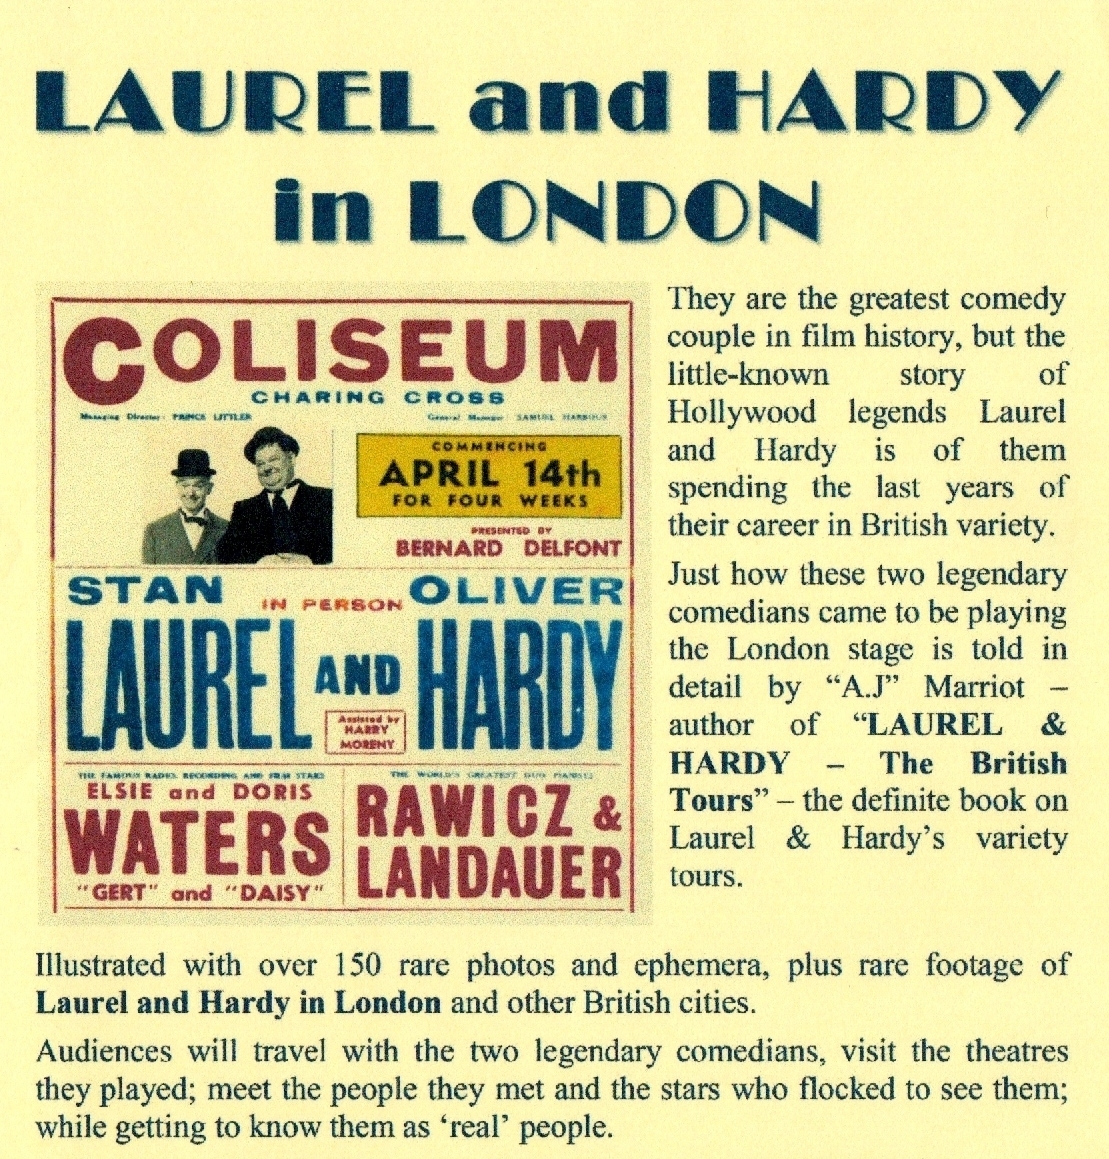 Laurel and Hardy in London by author A.J Marriot